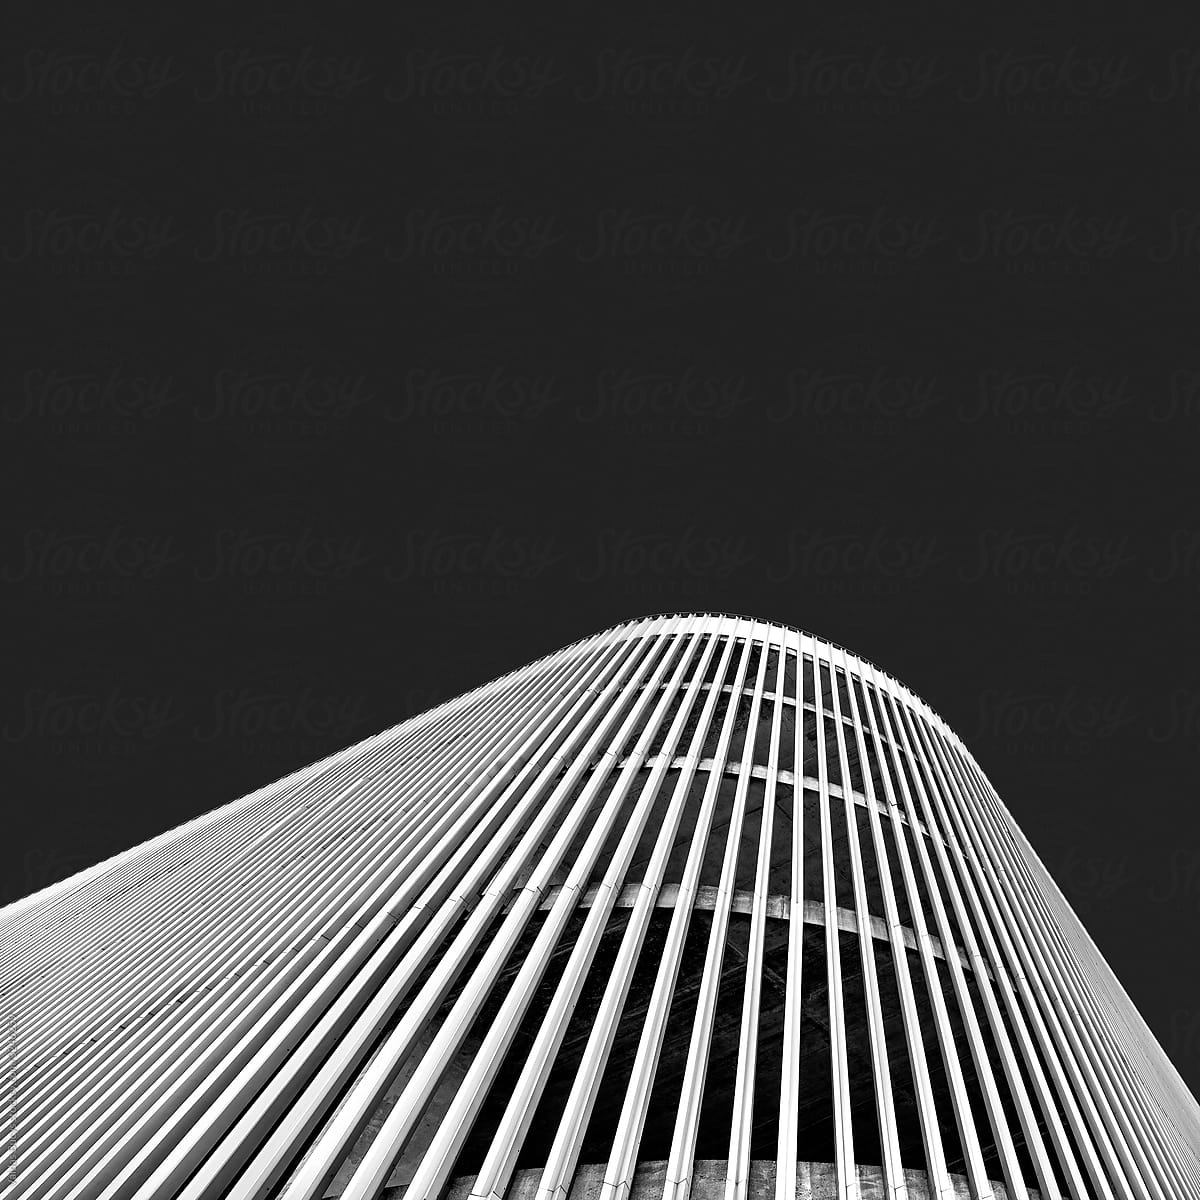 Black and white abstract industrial building